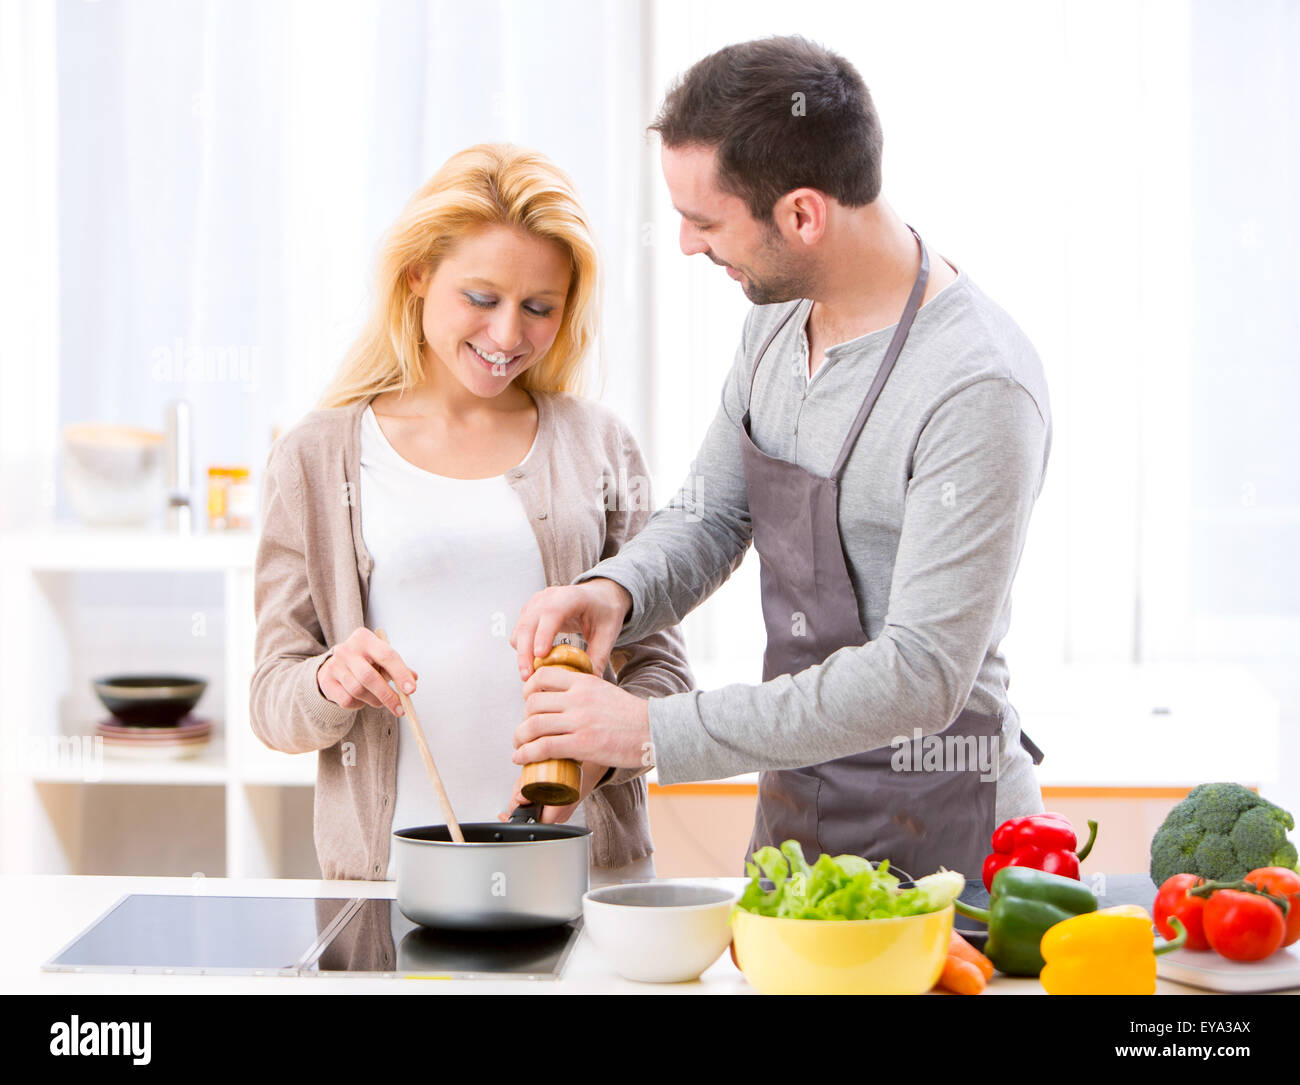 View of a Young attractive man helping out his wife while cooking Stock Photo